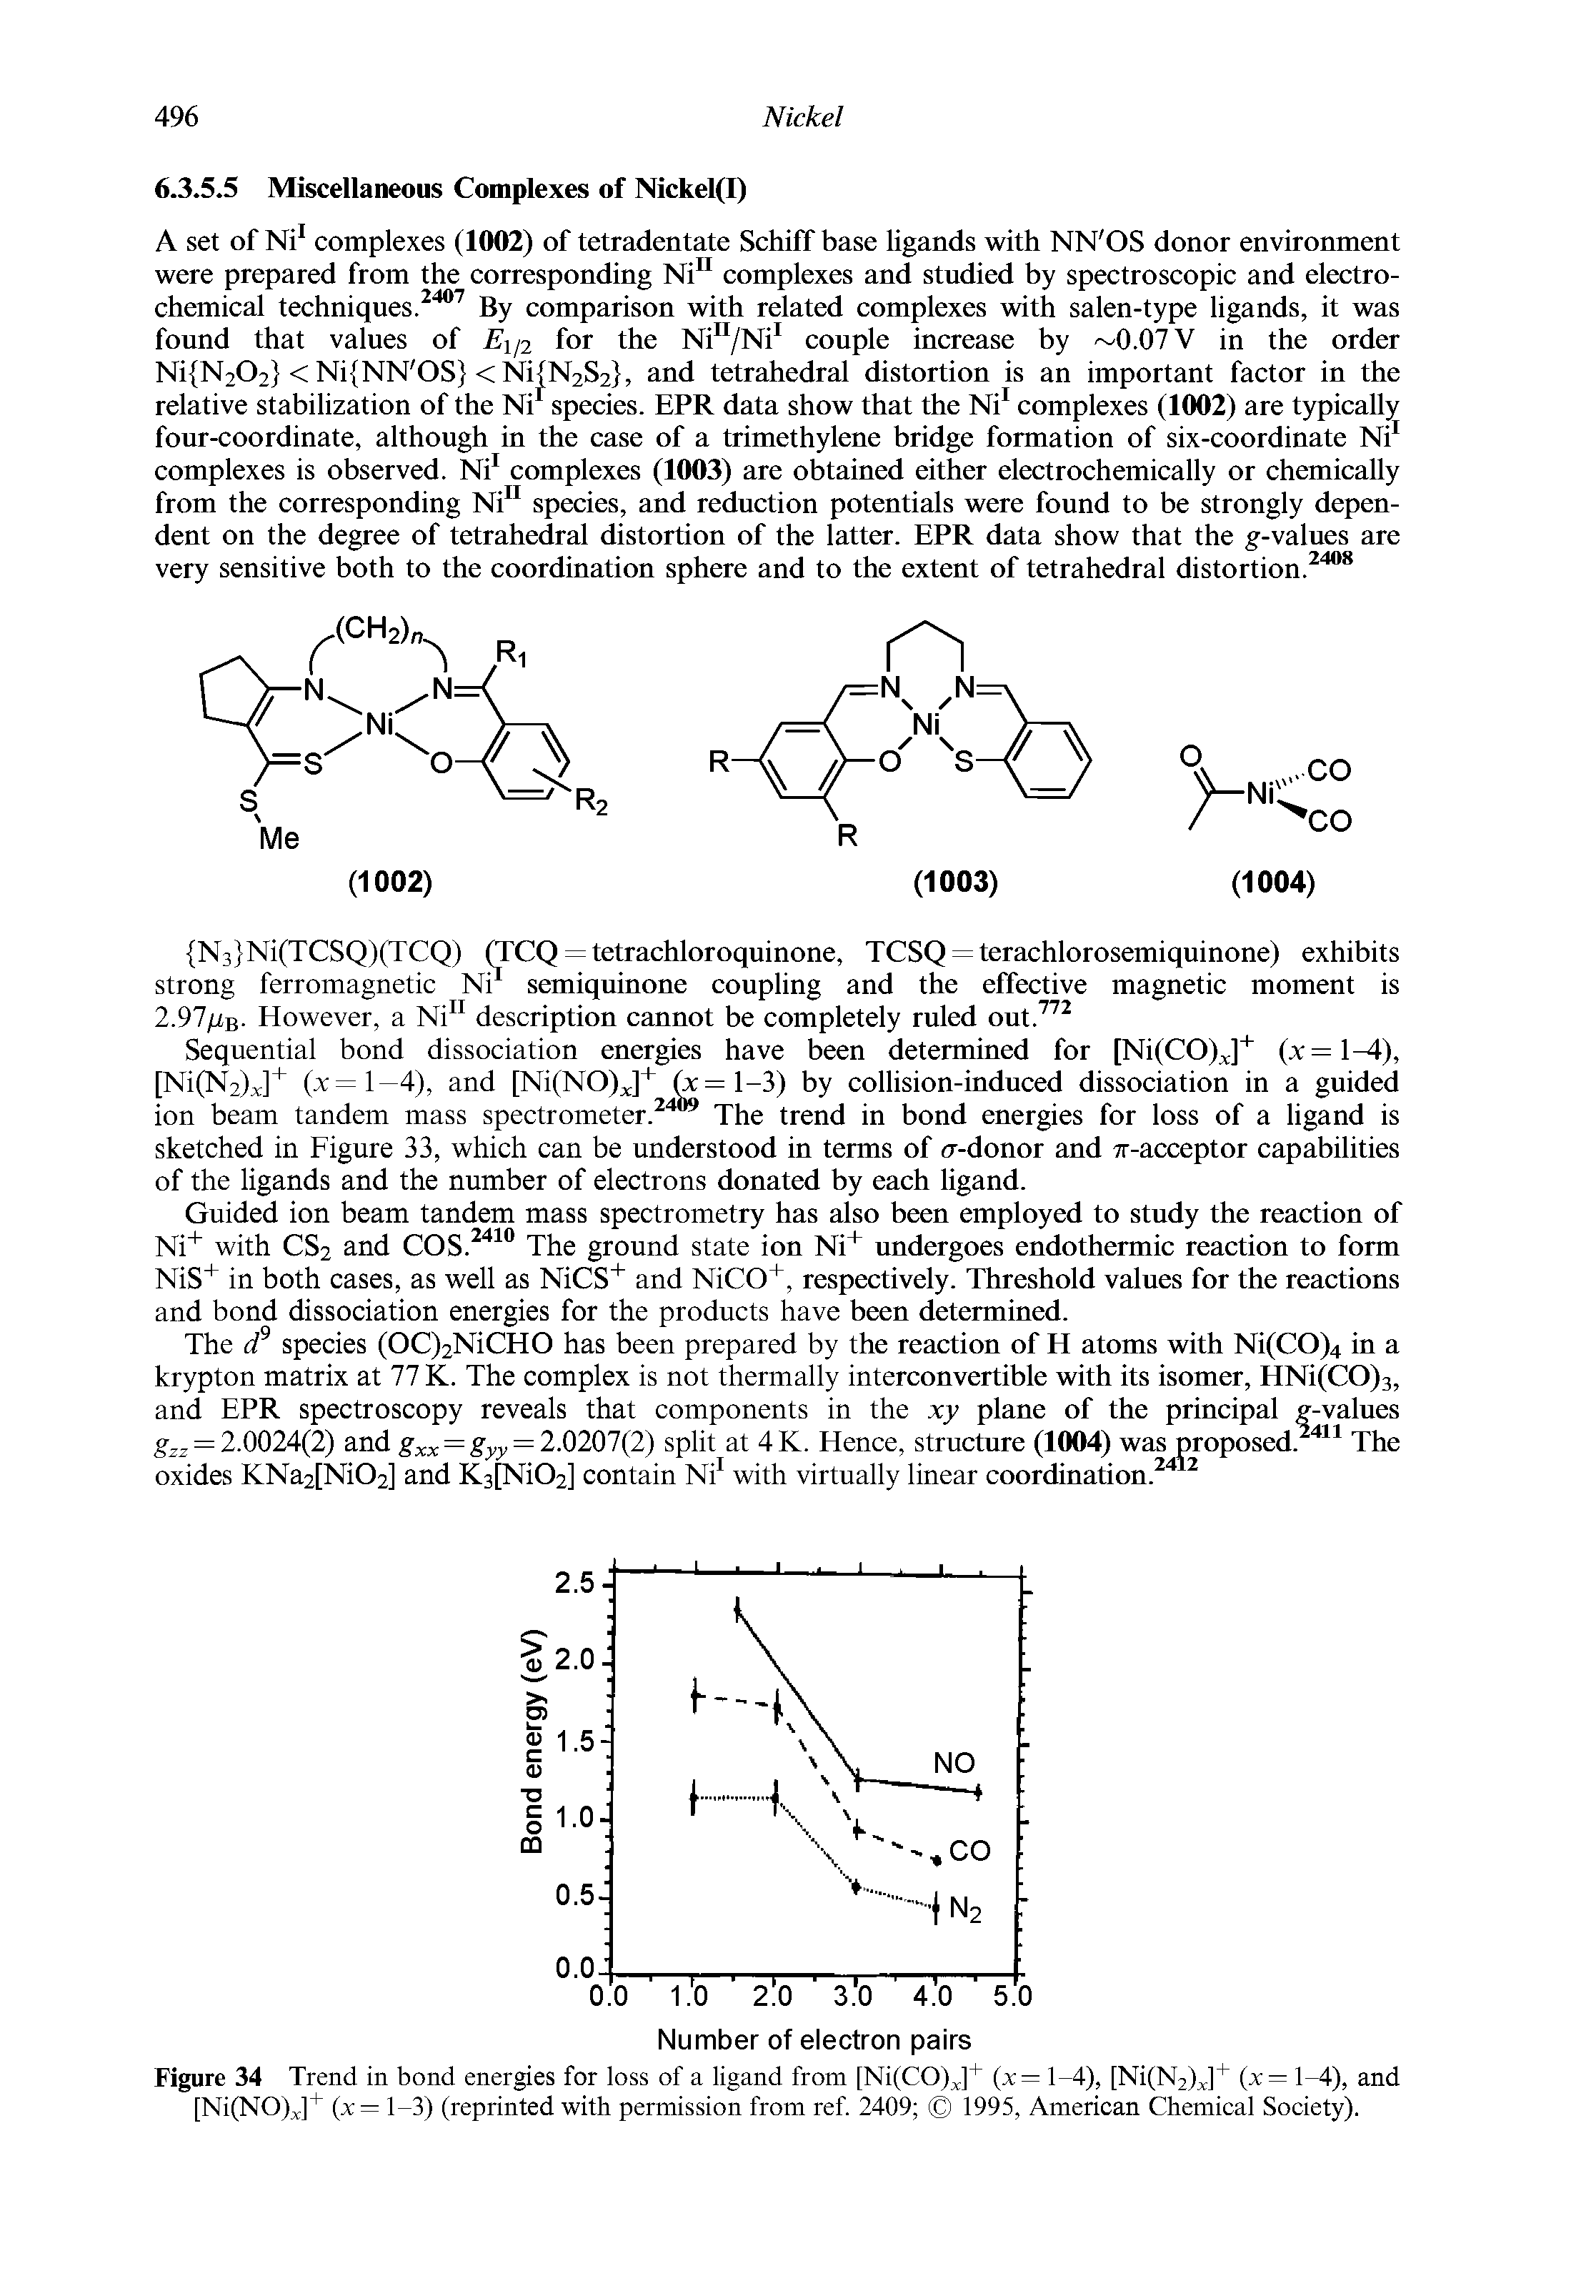 Figure 34 Trend in bond energies for loss of a ligand from [Ni(CO)J+ x— 1-4), [Ni(N2)J+ (x= 1-4), and [Ni(NO)J+ x— 1-3) (reprinted with permission from ref. 2409 1995, American Chemical Society).